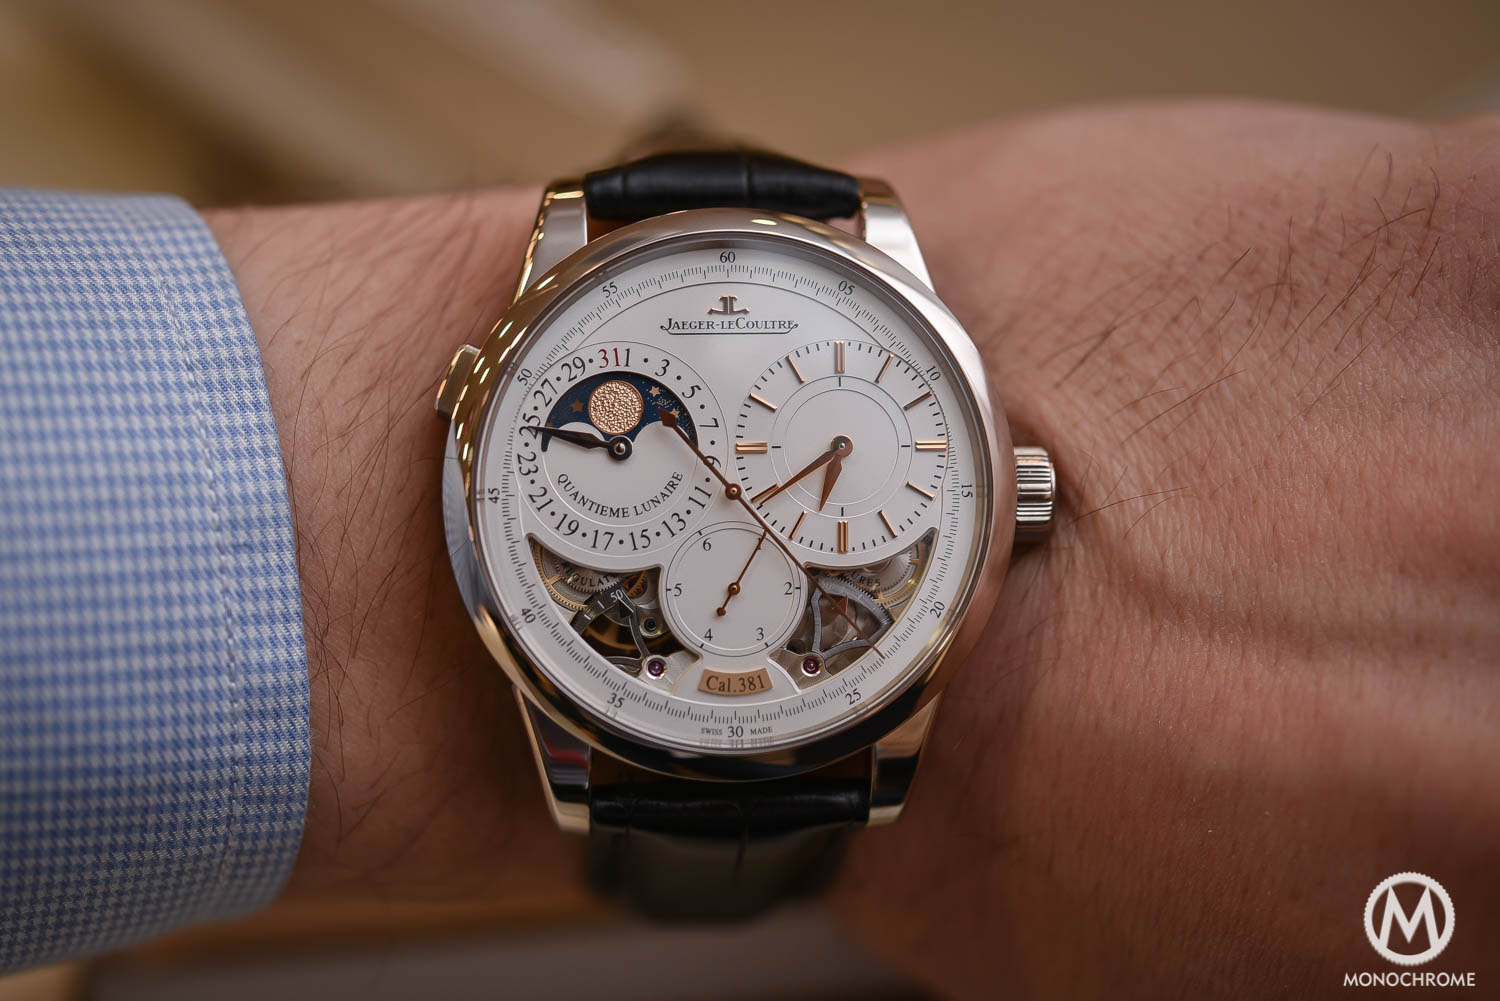 Jaeger-LeCoultre Duometre Quantieme Lunaire in white gold and opened dial - 6